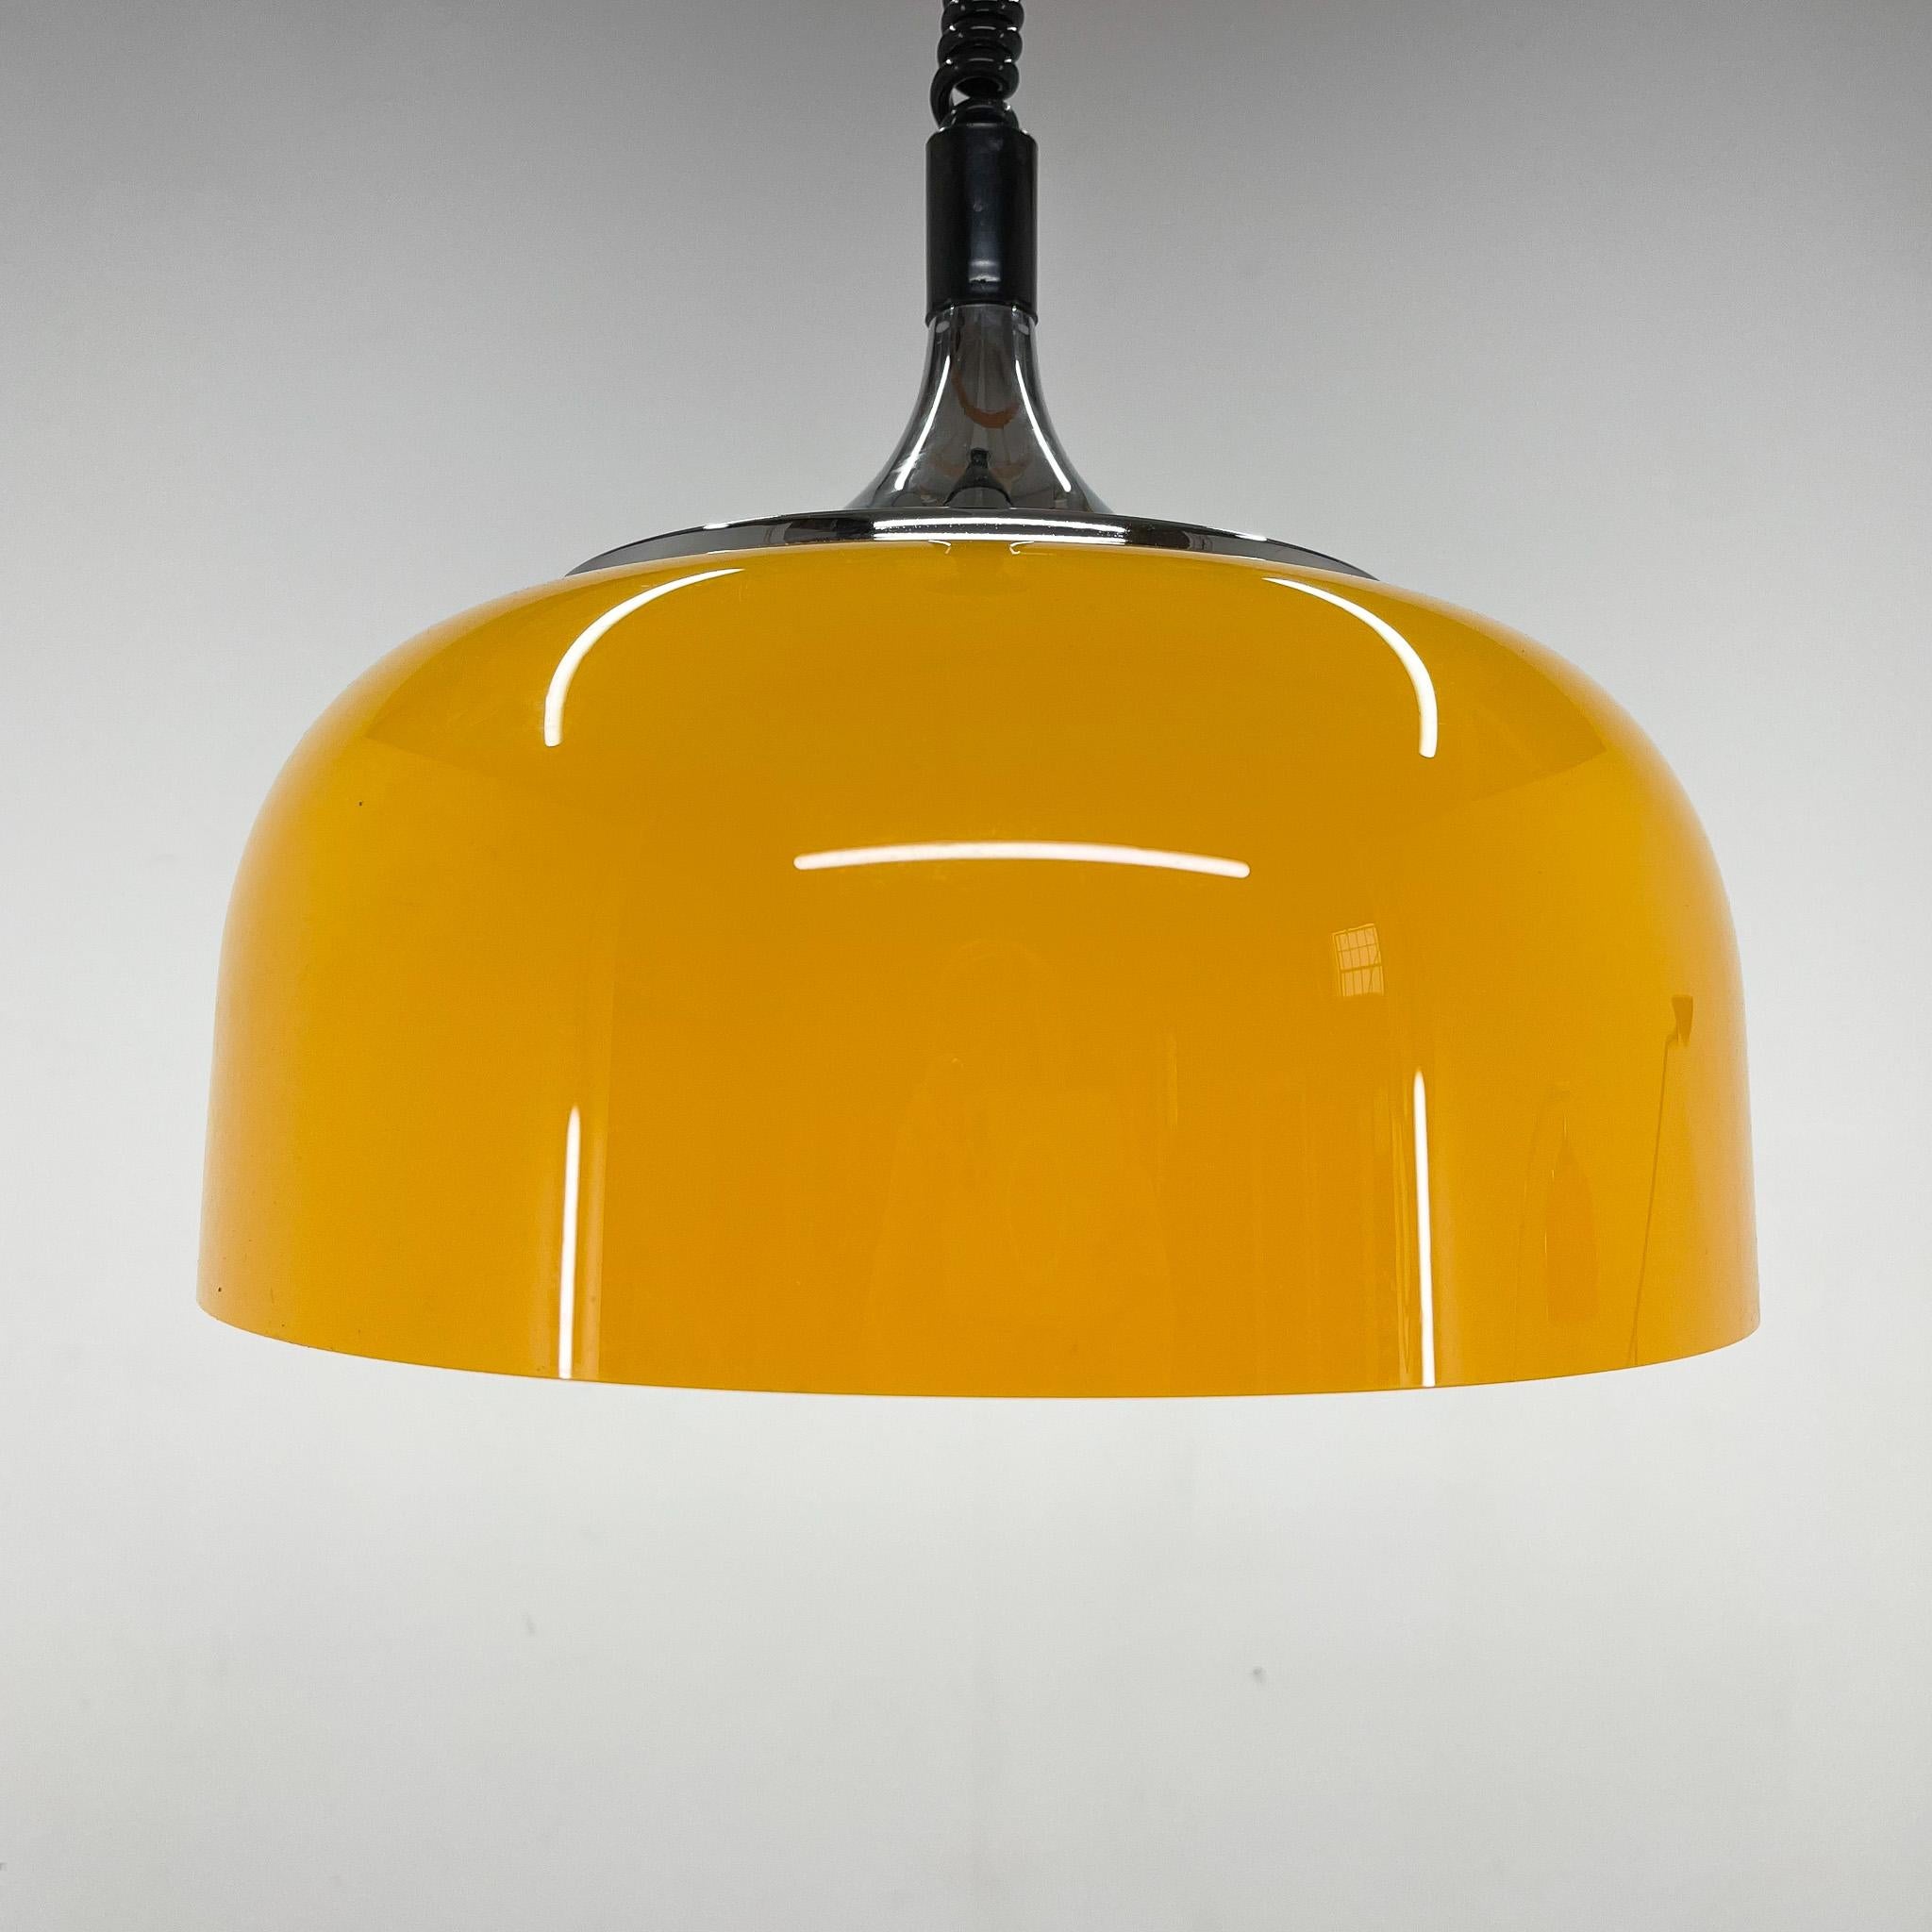 Vintage adjustable, space age pendant, designed by Harvey Guzzini for Meblo in the 1970s. 
Very good vintage condition. 
The max height when fully stretched is 108 cm.